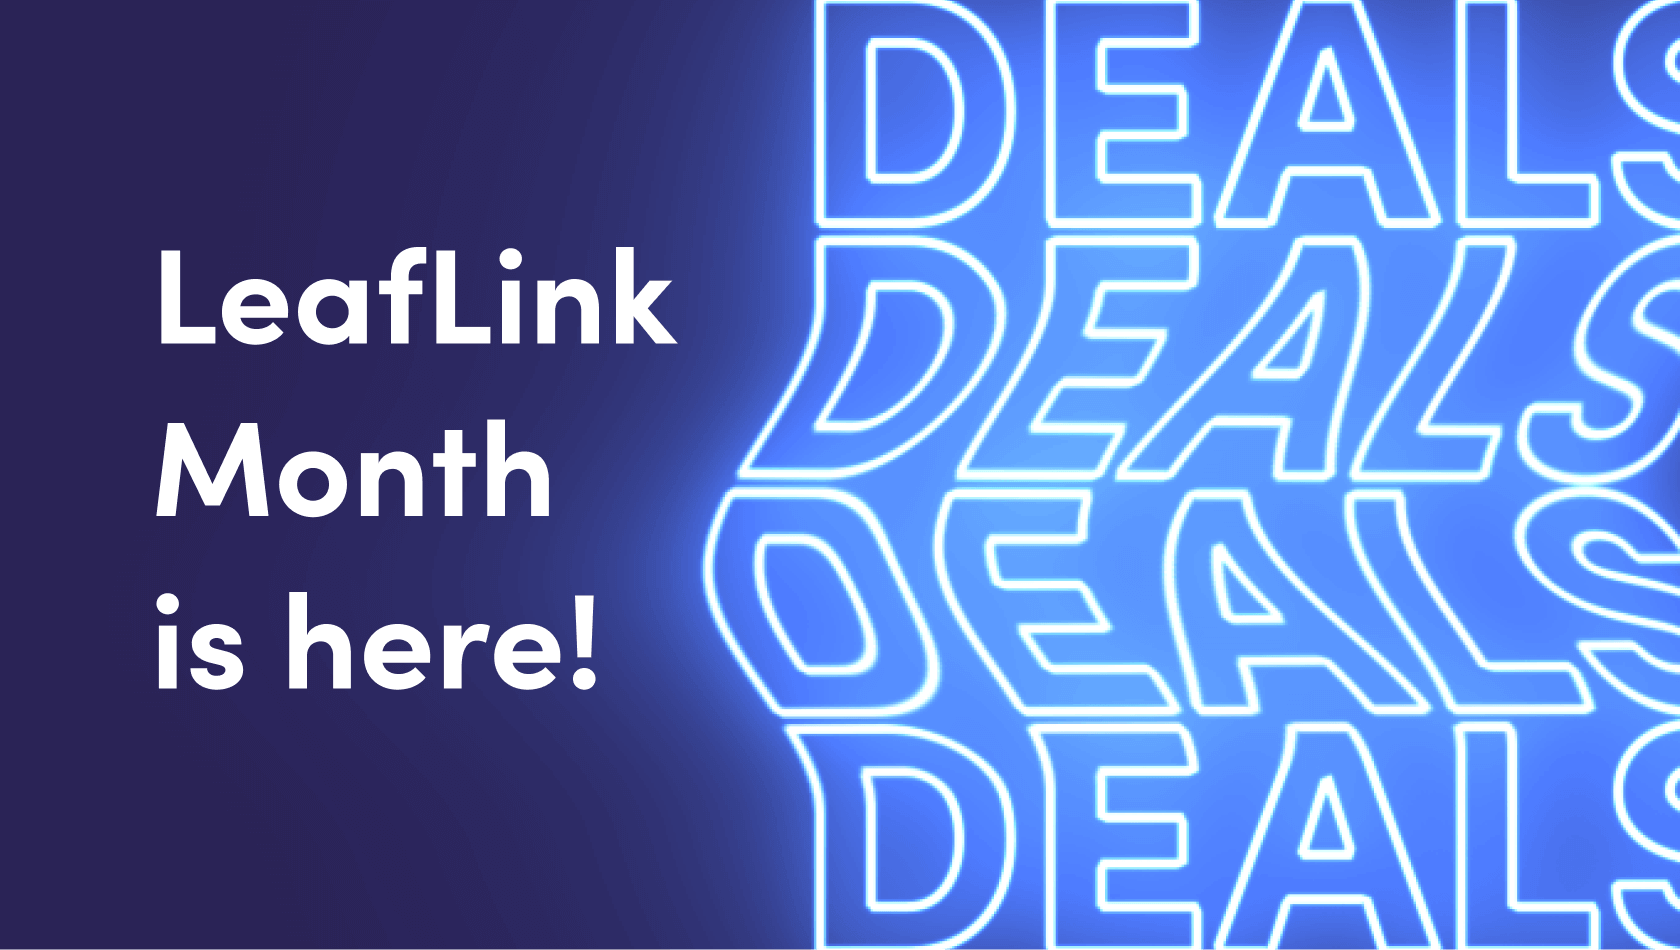 Get Ready for Green Wednesday With LeafLink Month Deals